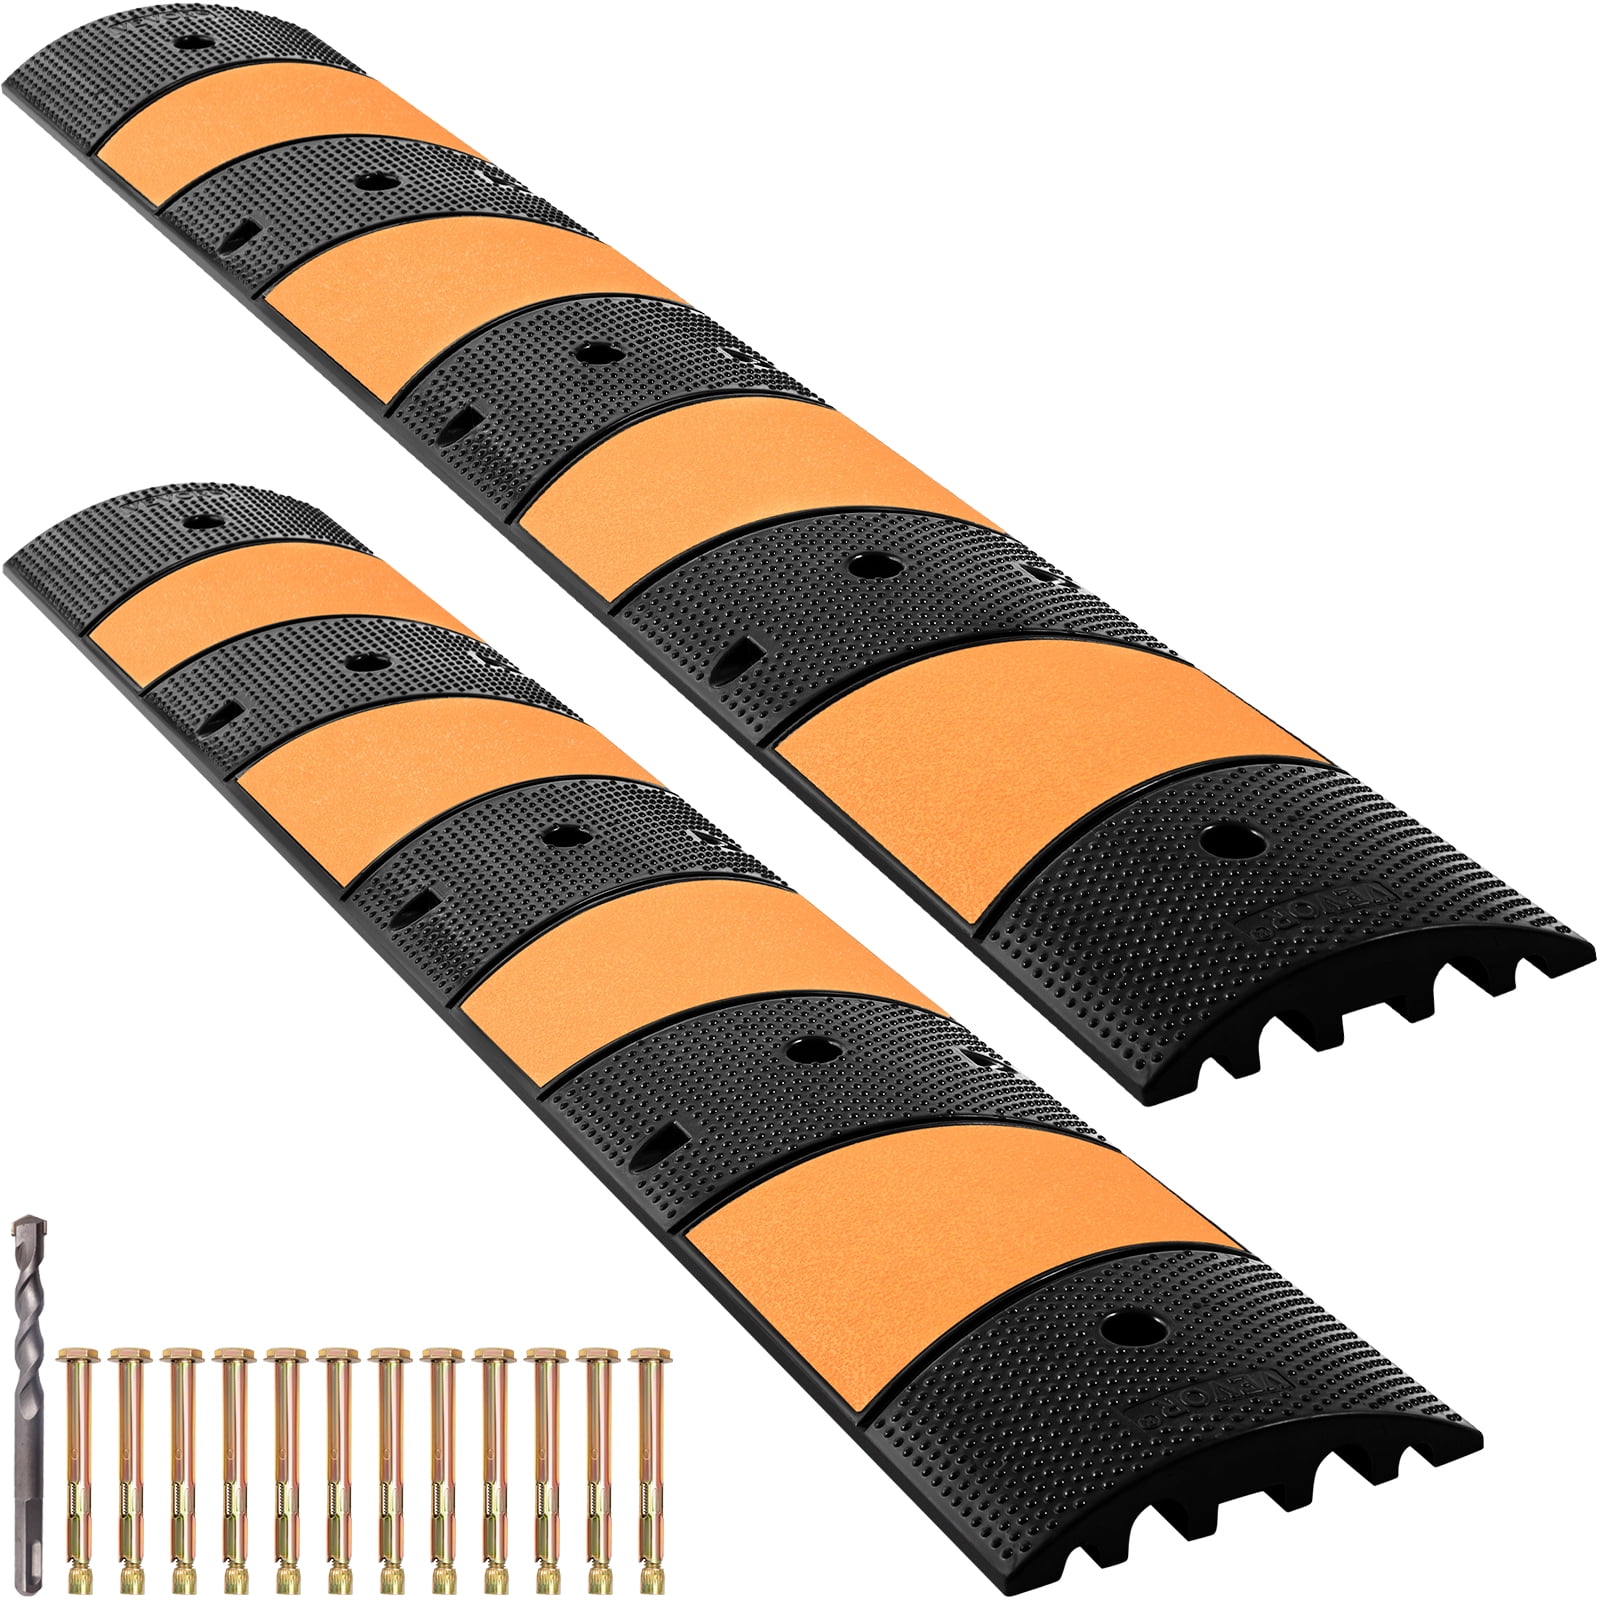 CAROOZE 6 Feet Rubber Speed Bumps 2 Channel 72 Traffic Speed Humps with 10 Bolt Spikes for Gravel Asphalt Concrete Driveway 2pcs 